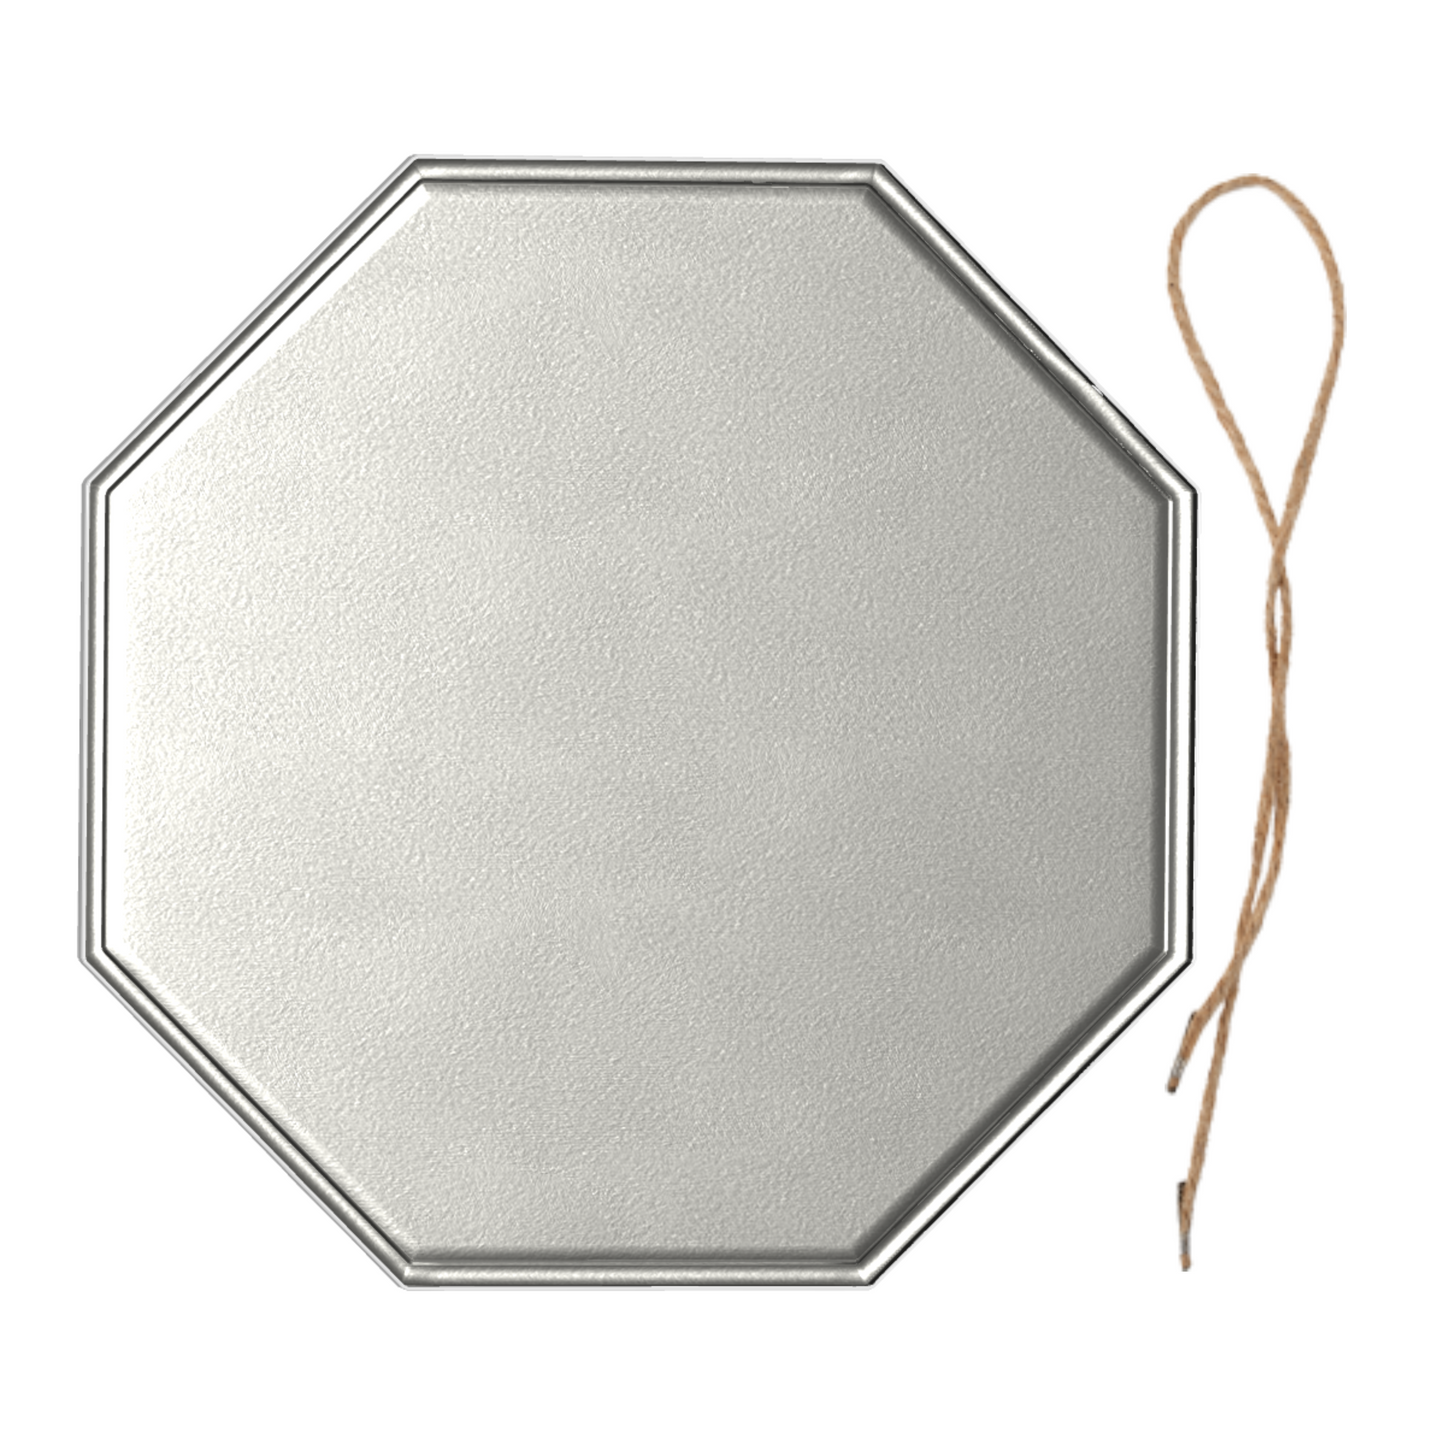 Octagonal Shape Metal Decor - Upload Your Own Picture - HayGoodies